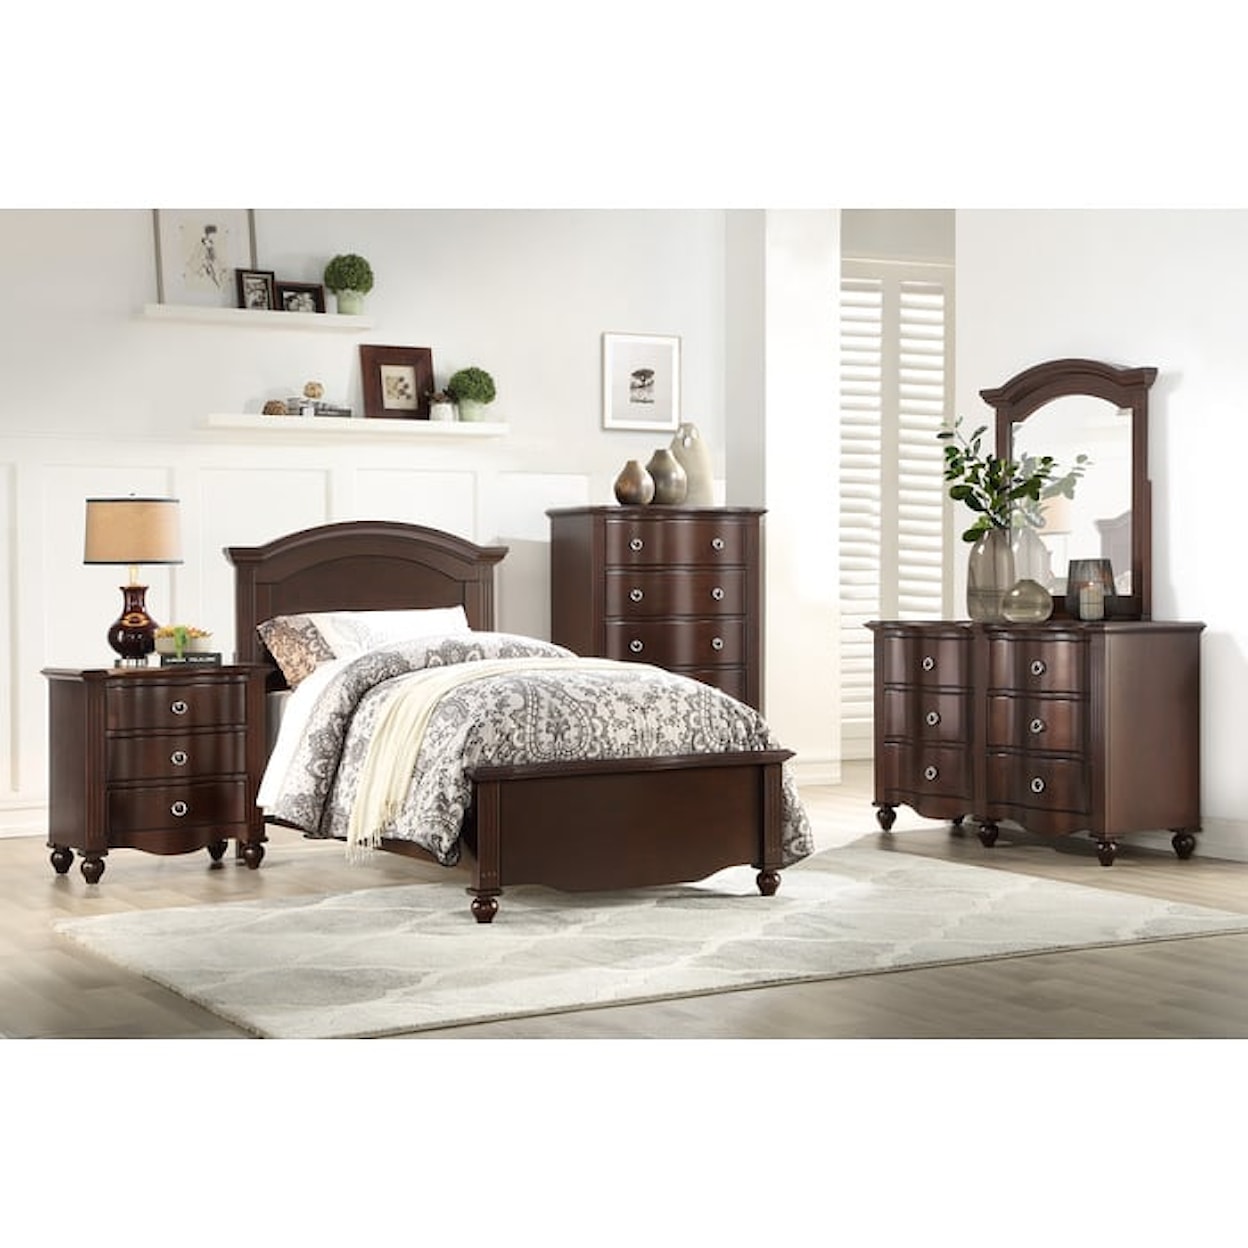 Homelegance Meghan Twin Arched Panel Bed